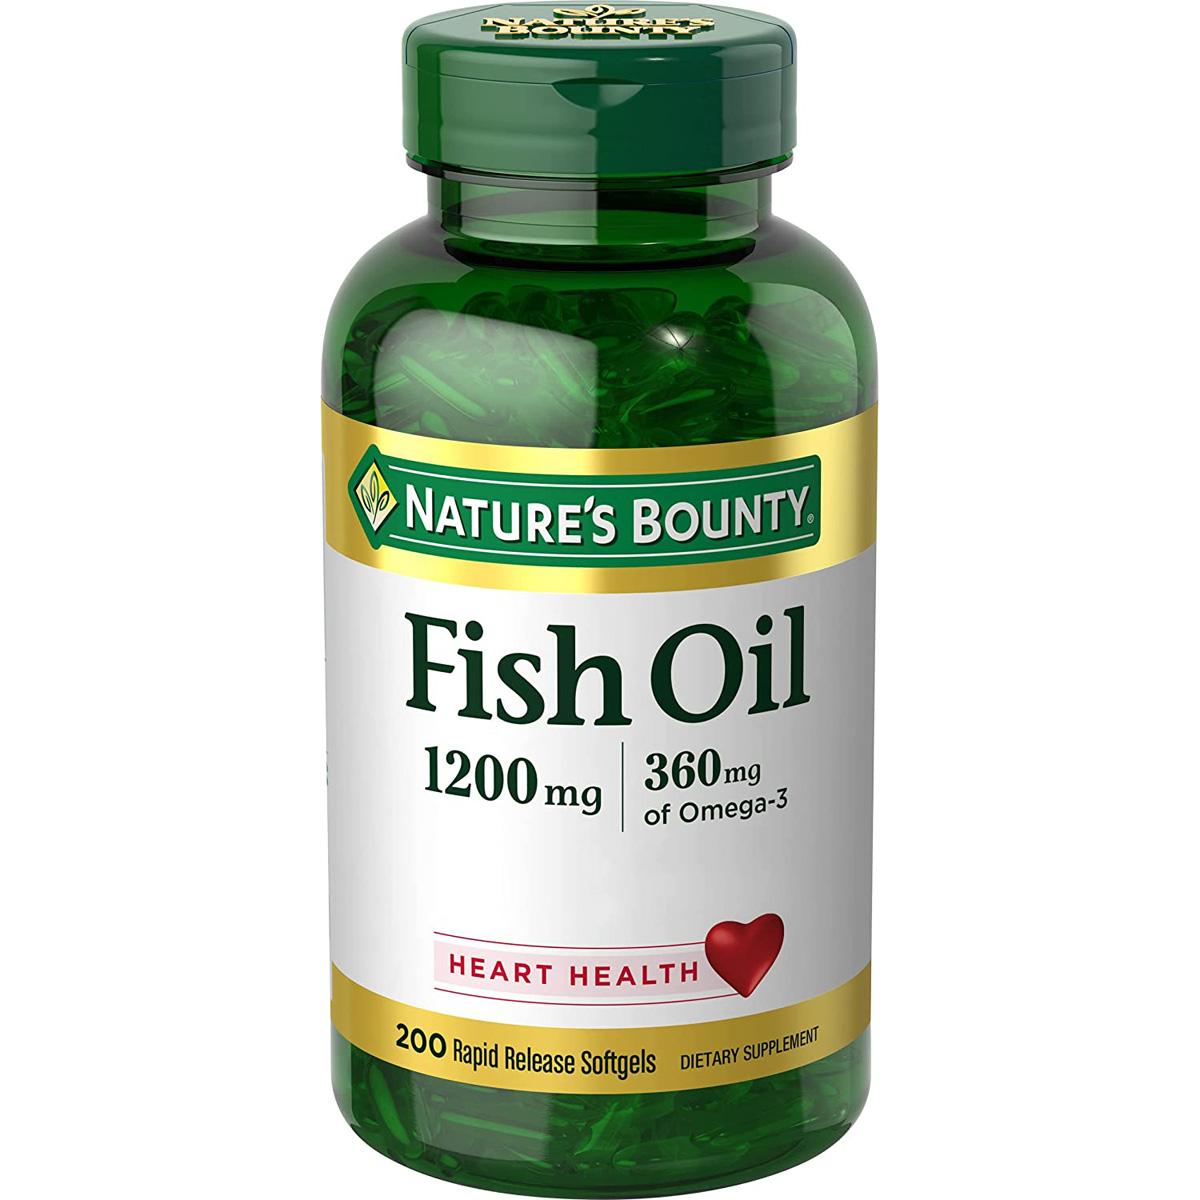 Natures Bounty Fish Oil Softgels 1200mg 200 Pack for $7.79 Shipped